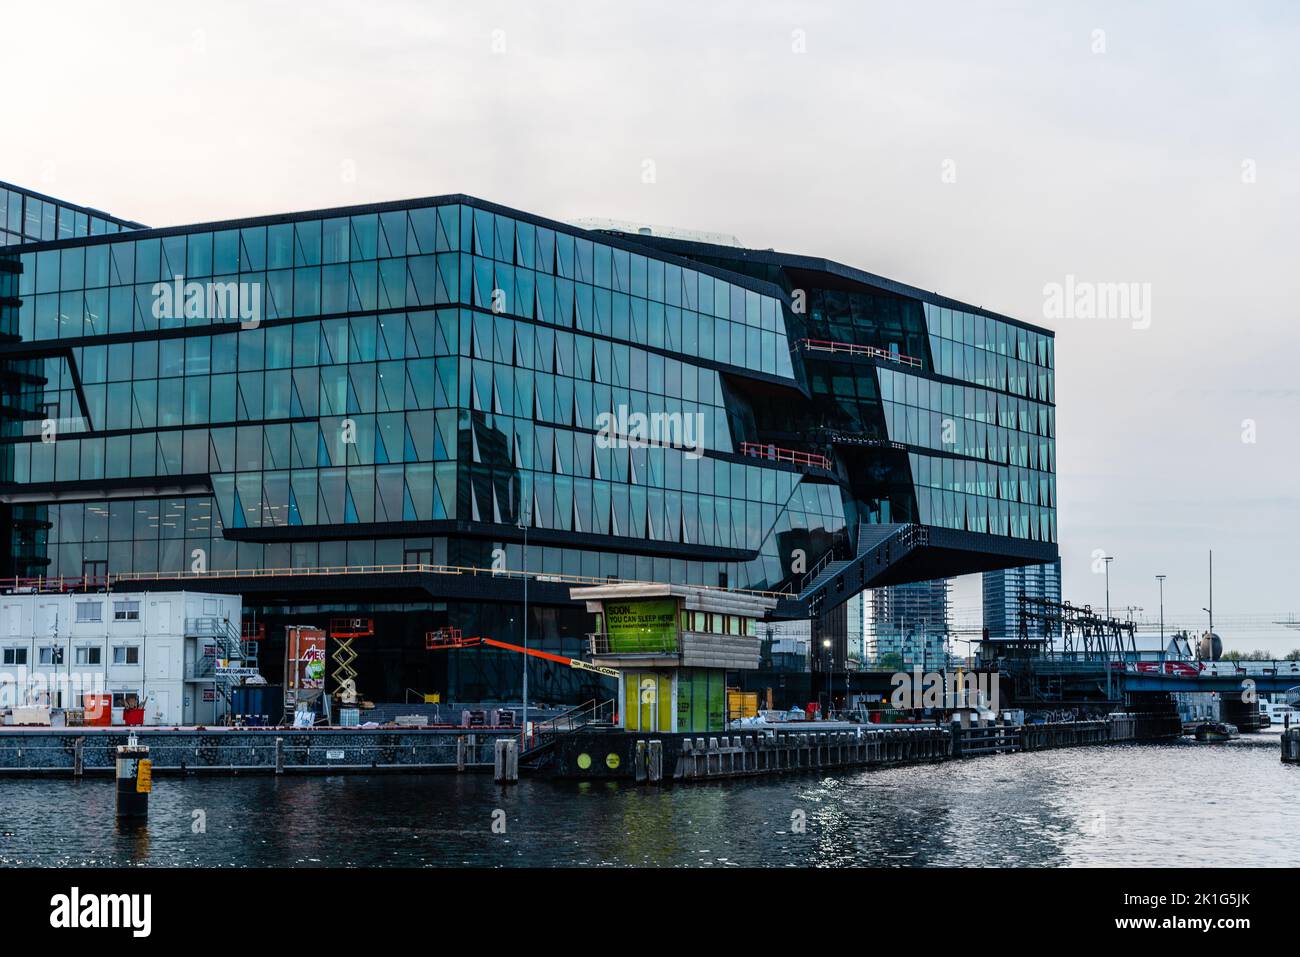 Amsterdam, Netherlands - May 6, 2022: View of the waterfront of the canal with new luxury residential and commercial developments Stock Photo